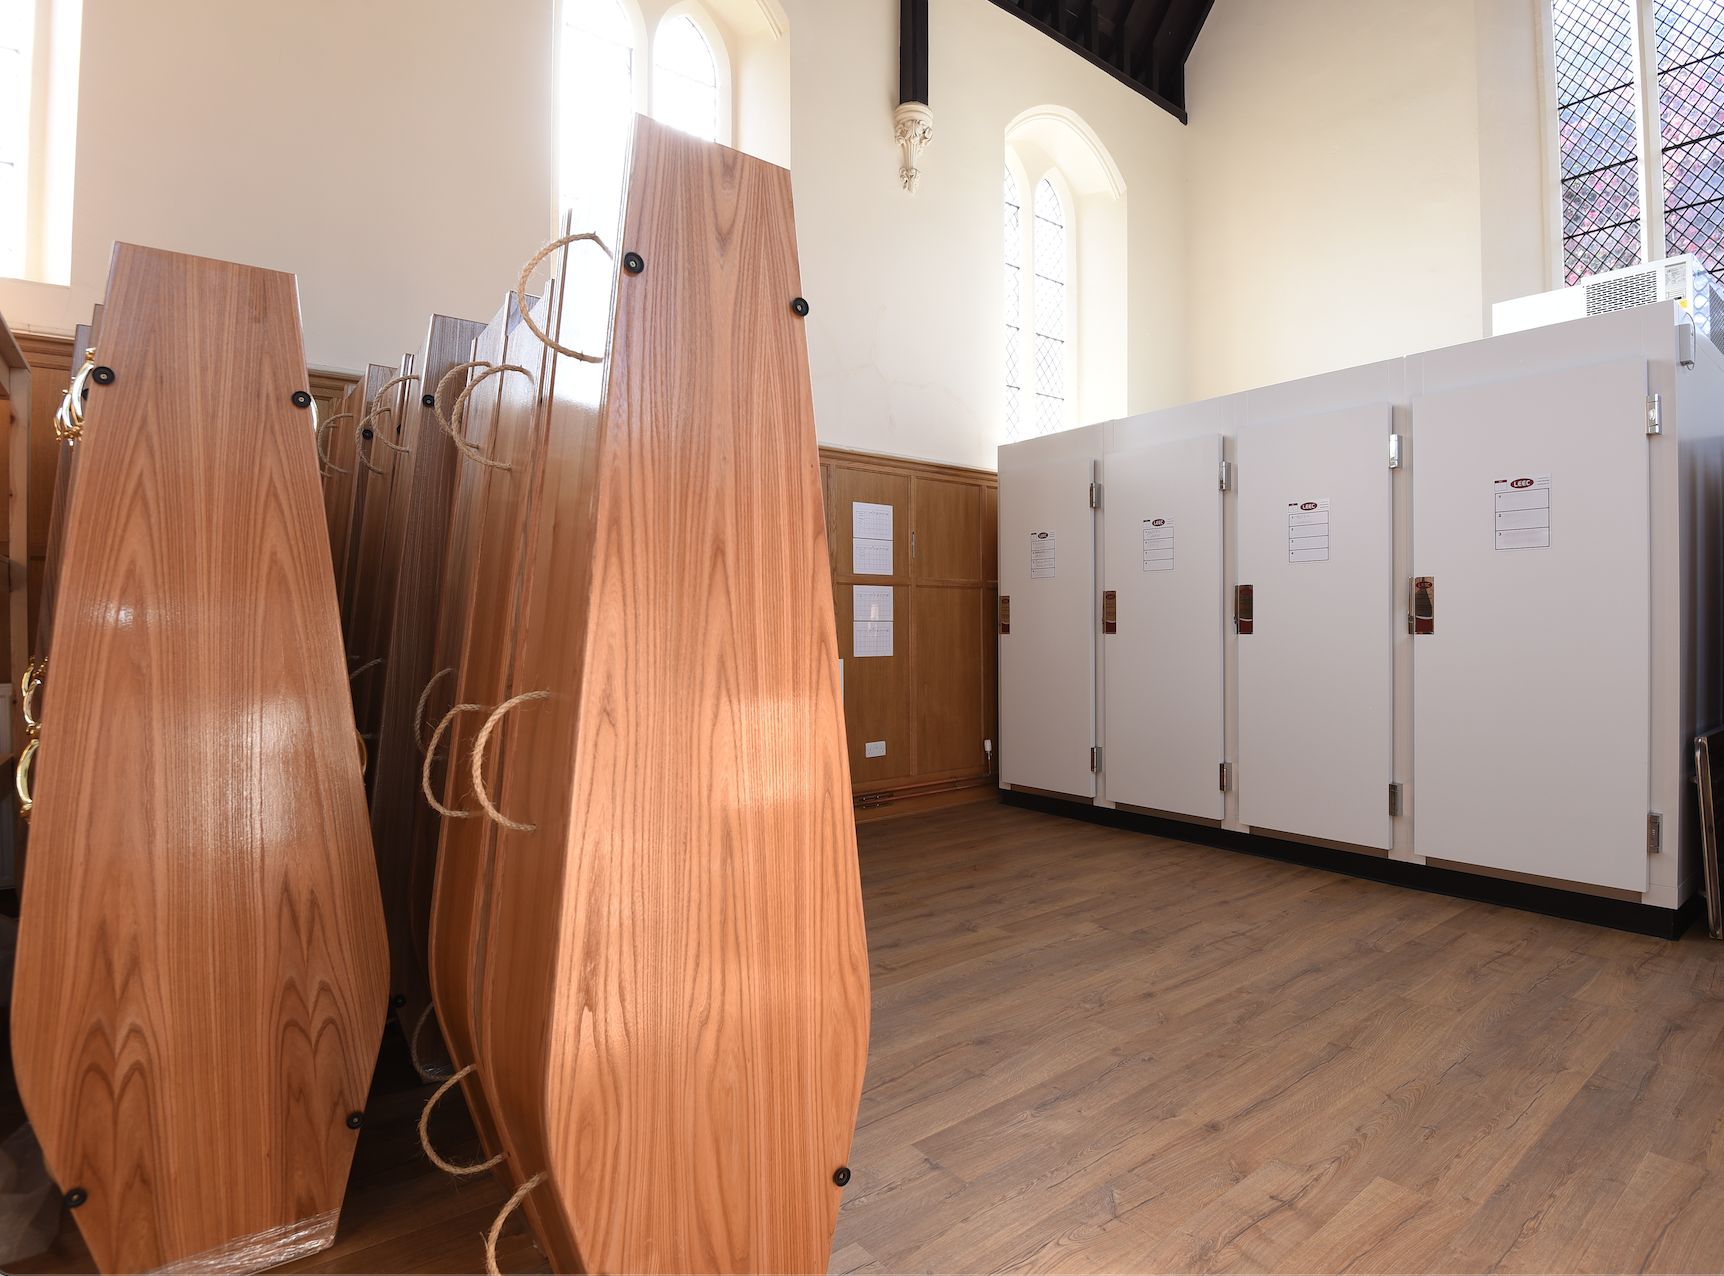 A room filled with natural light, on the left are stacks of wooden coffins standing upright, on the right are three mortuary freezers